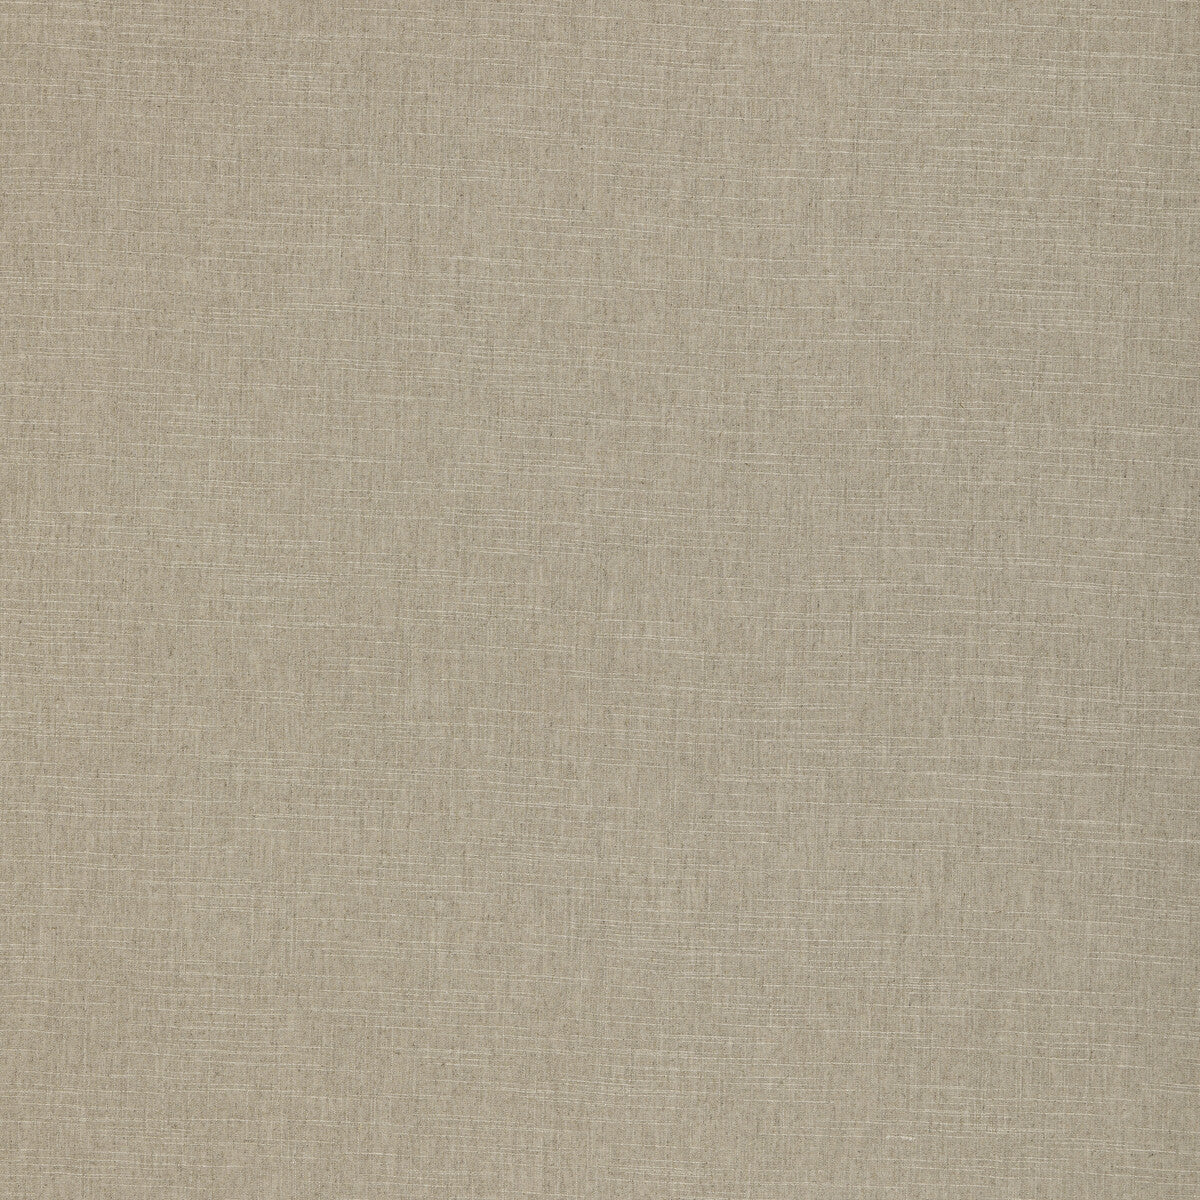 Chert fabric in linen color - pattern ED85390.110.0 - by Threads in the Quintessential Naturals collection